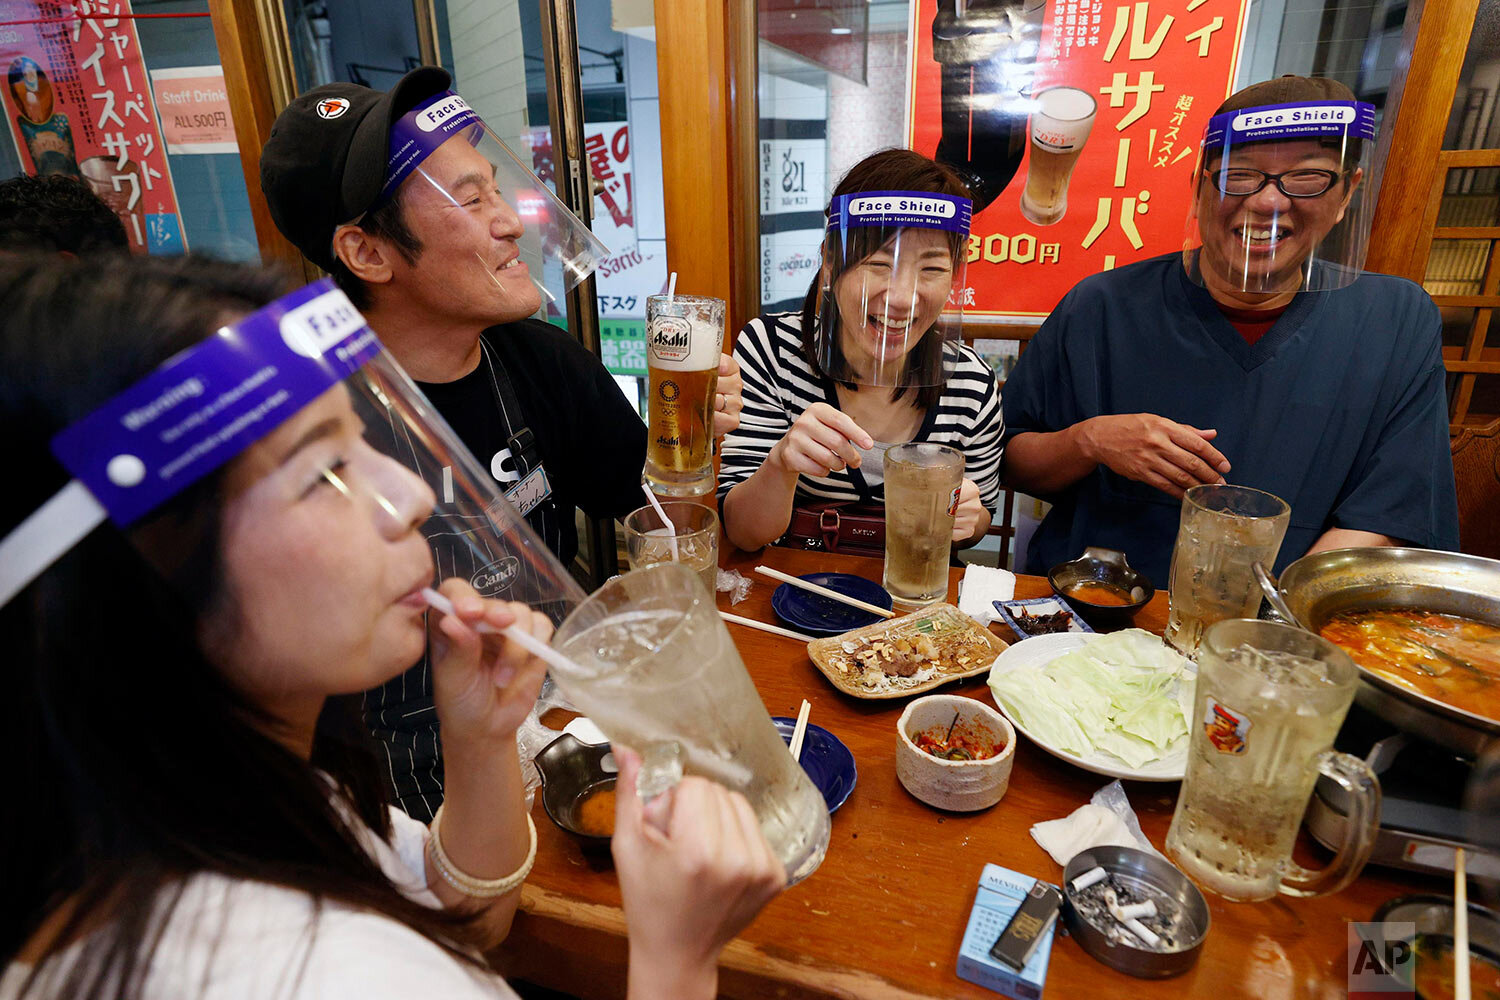  People, wearing face shields, eat together at a pub in Osaka, western Japan Monday, May 25, 2020, as Japan lifted the coronavirus state of emergency in Osaka and the two neighboring prefectures of Kyoto and Hyogo. (Suo Takekuma/Kyodo News via AP) 